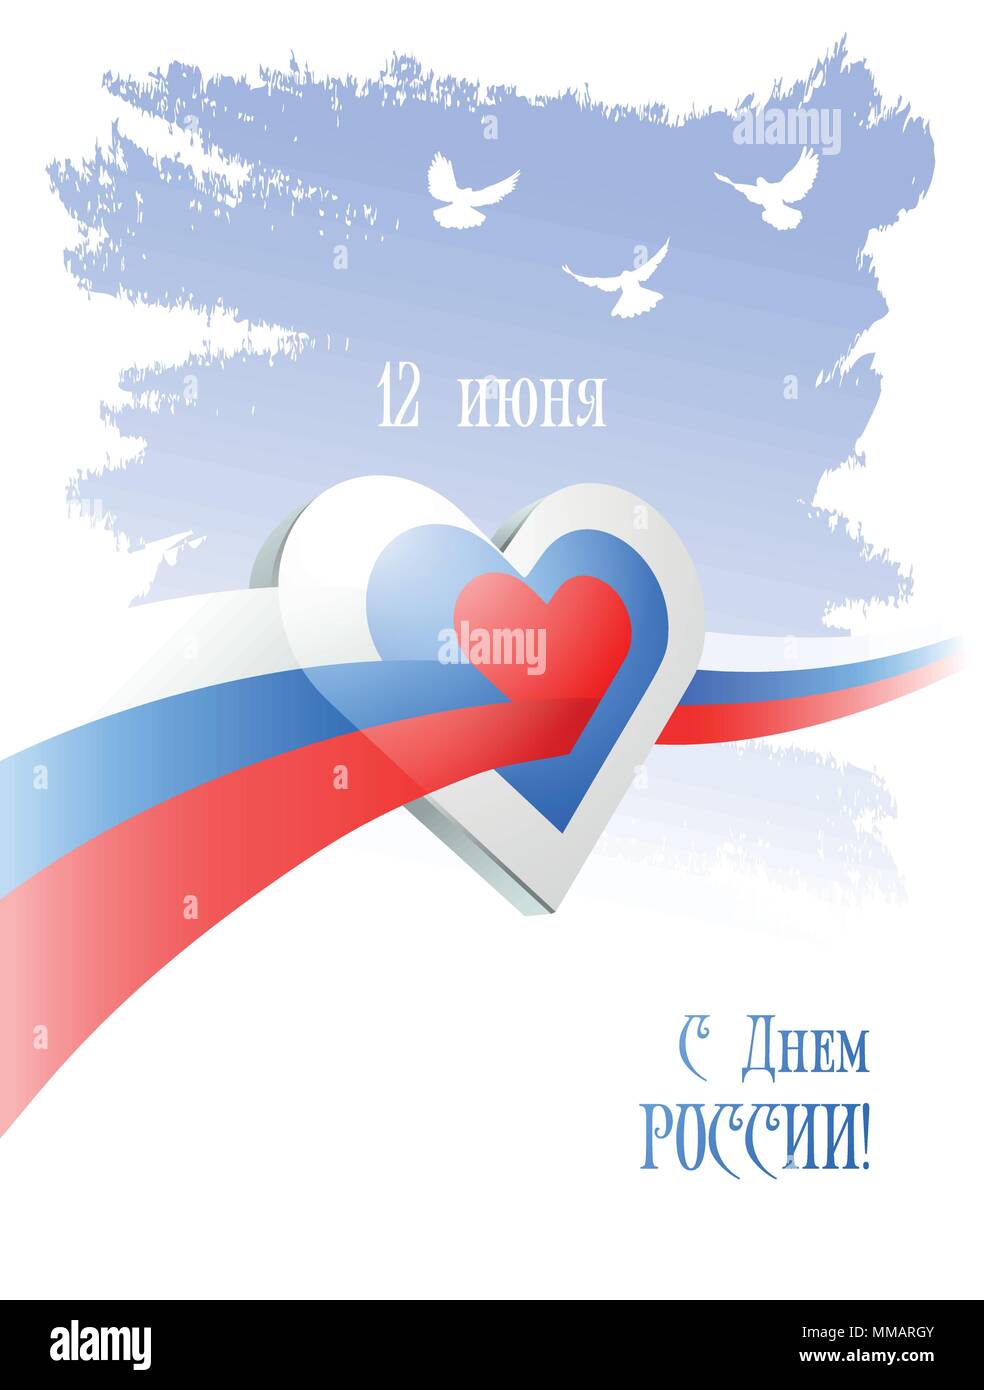 June 12. Happy Russia Day. Greeting card with waving russian flag, heart and doves. Stock Vector